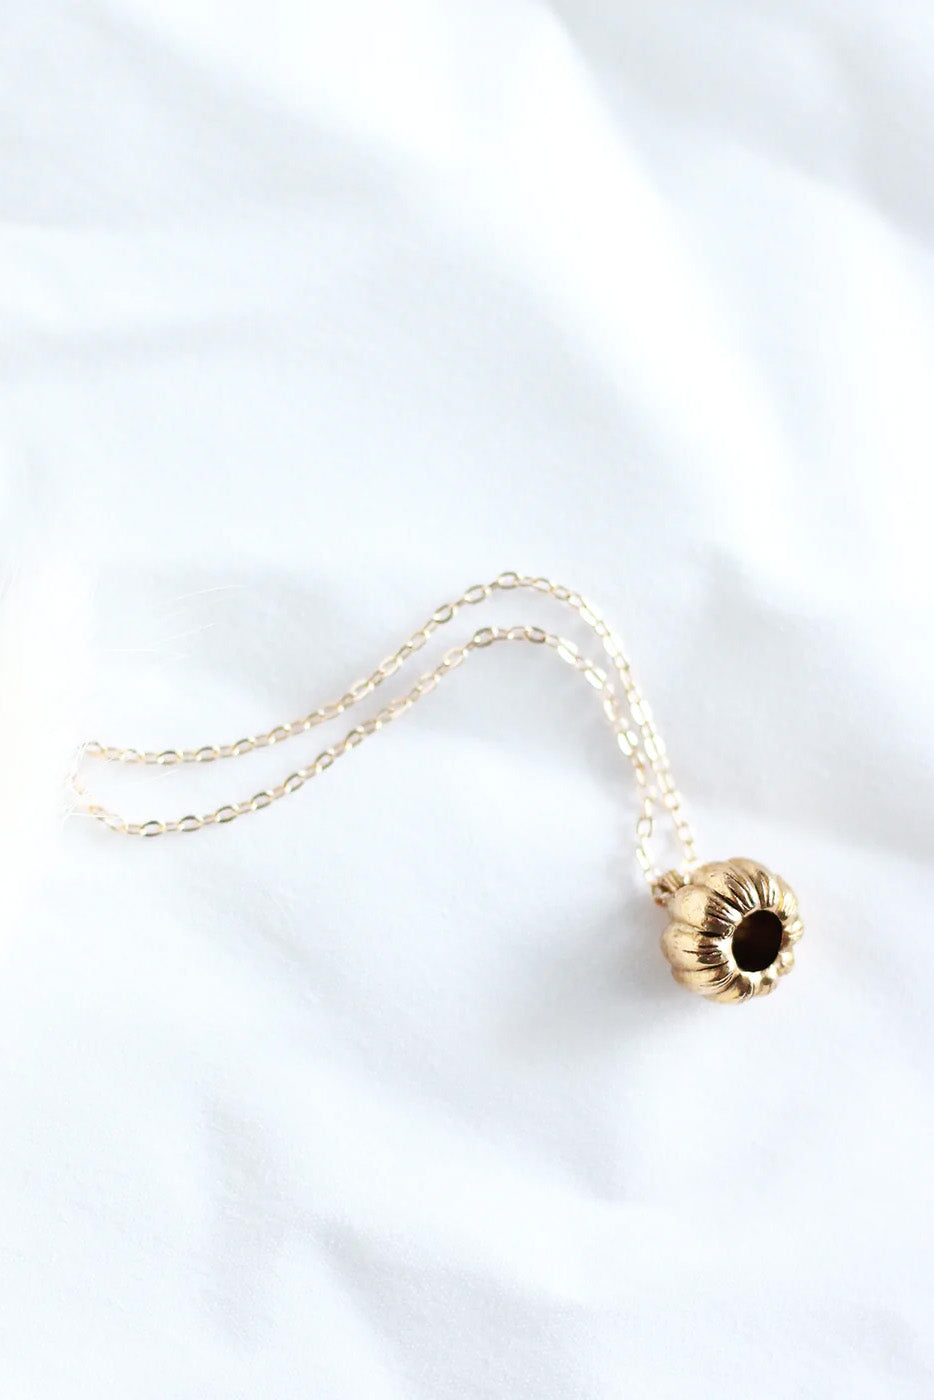 Pumpkin Necklace by Birch Jewellery, bottom view, Gold-plating, made in Ottawa